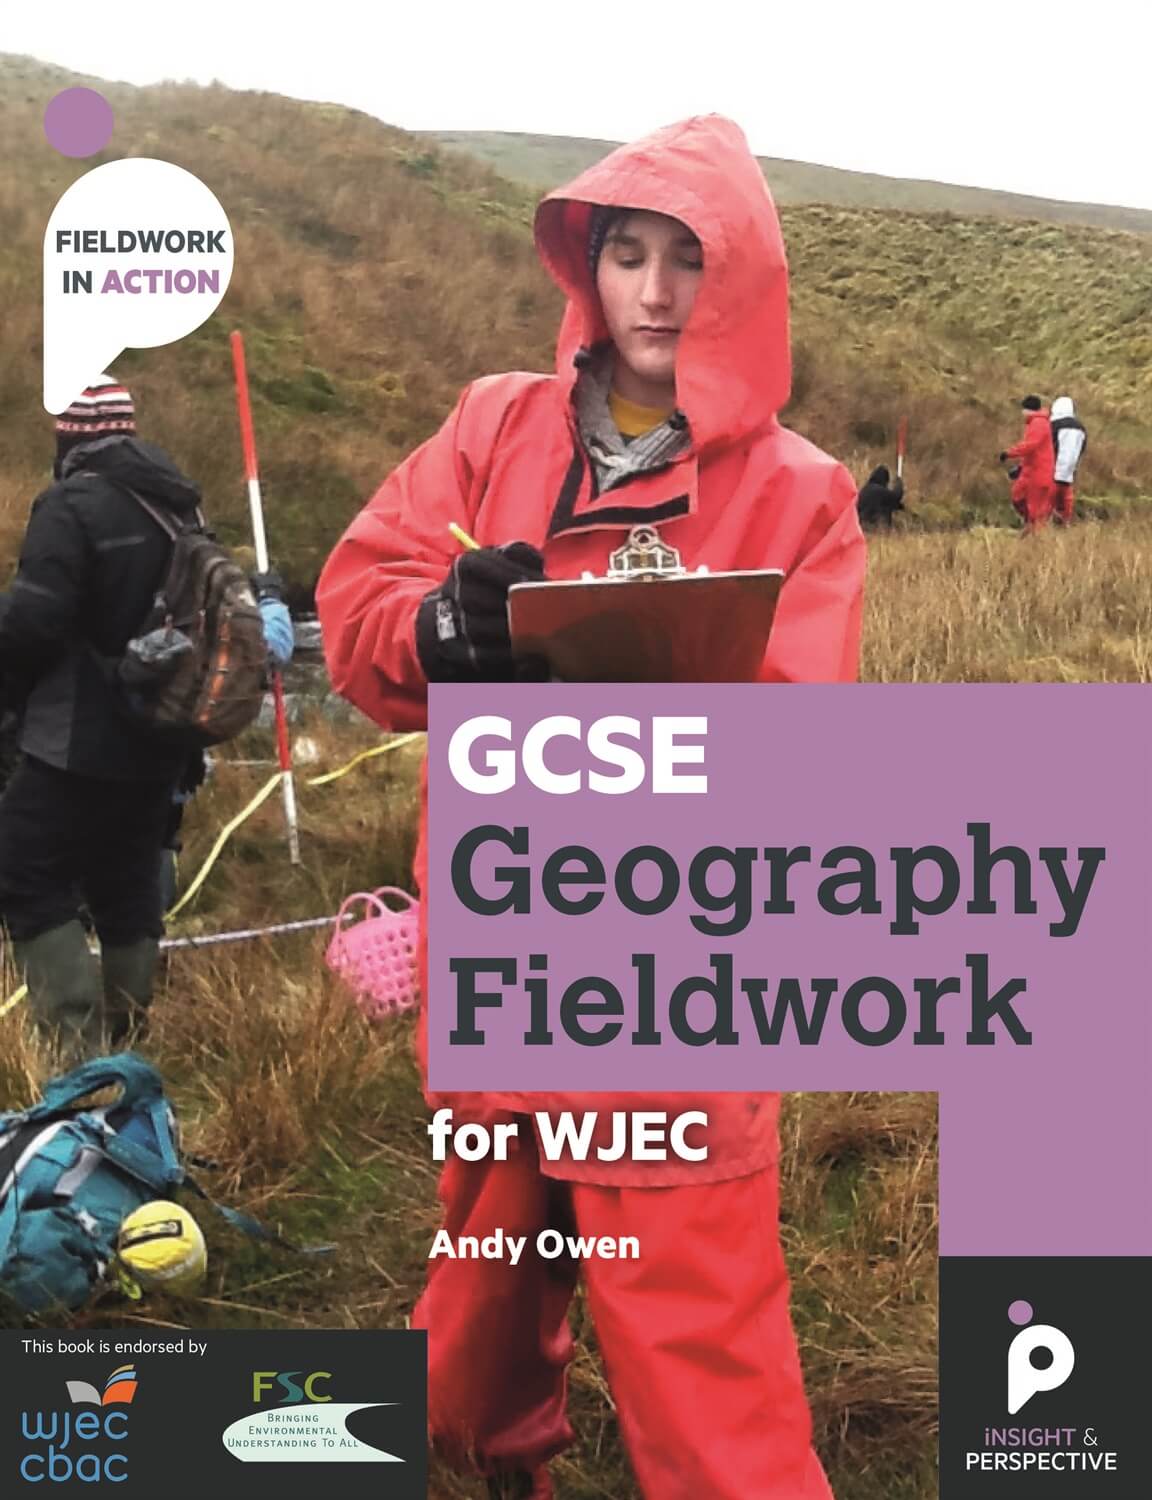 GCSE Geography Fieldwork for WJEC